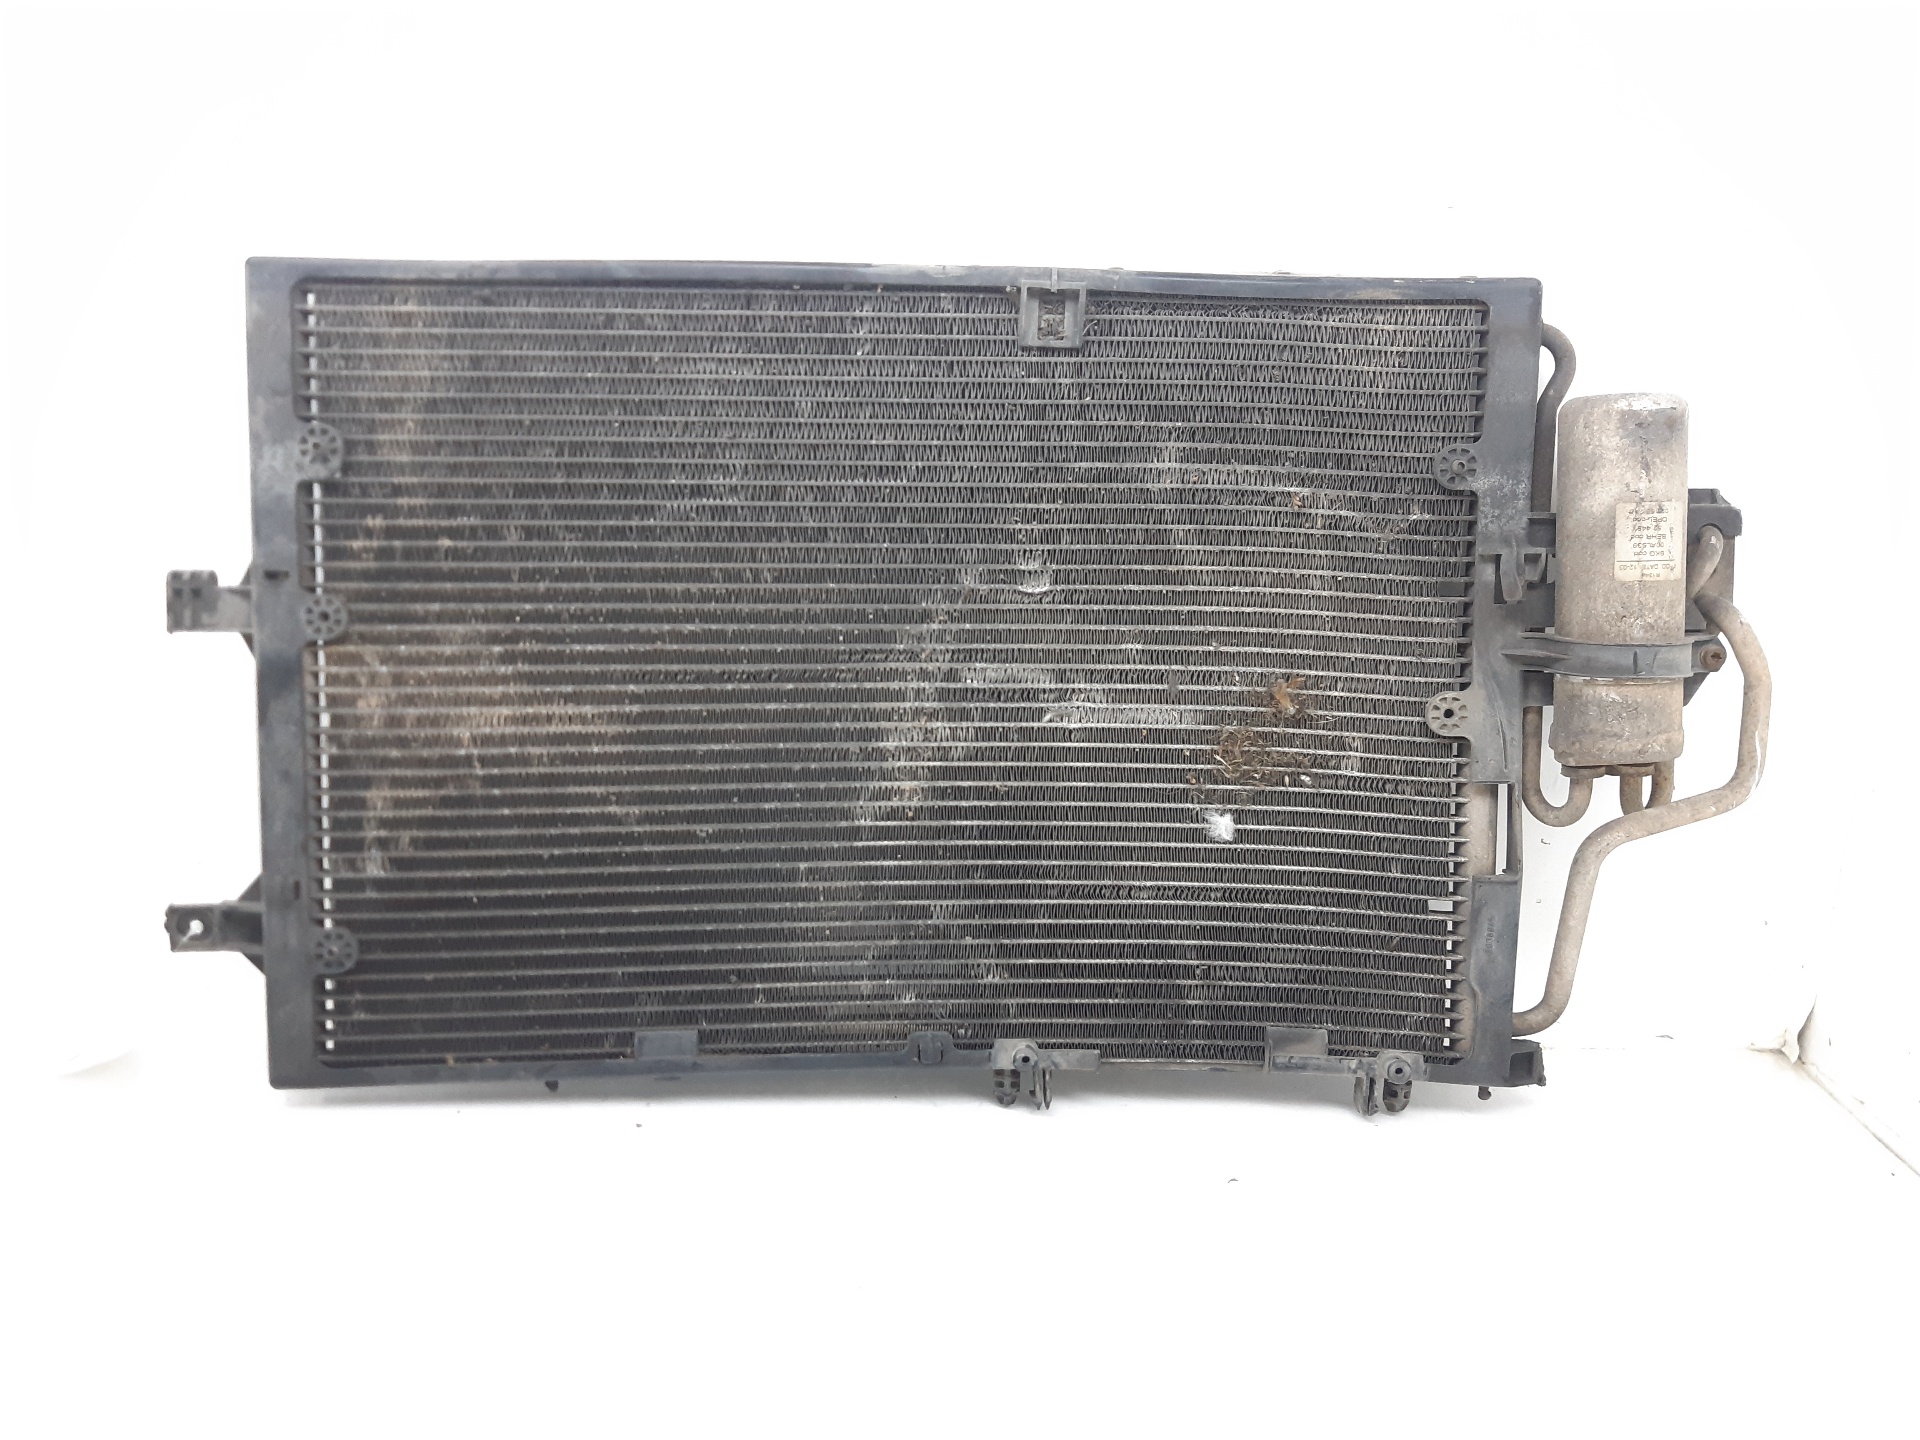 OPEL Corsa C (2000-2006) Other part 1850089 18709776